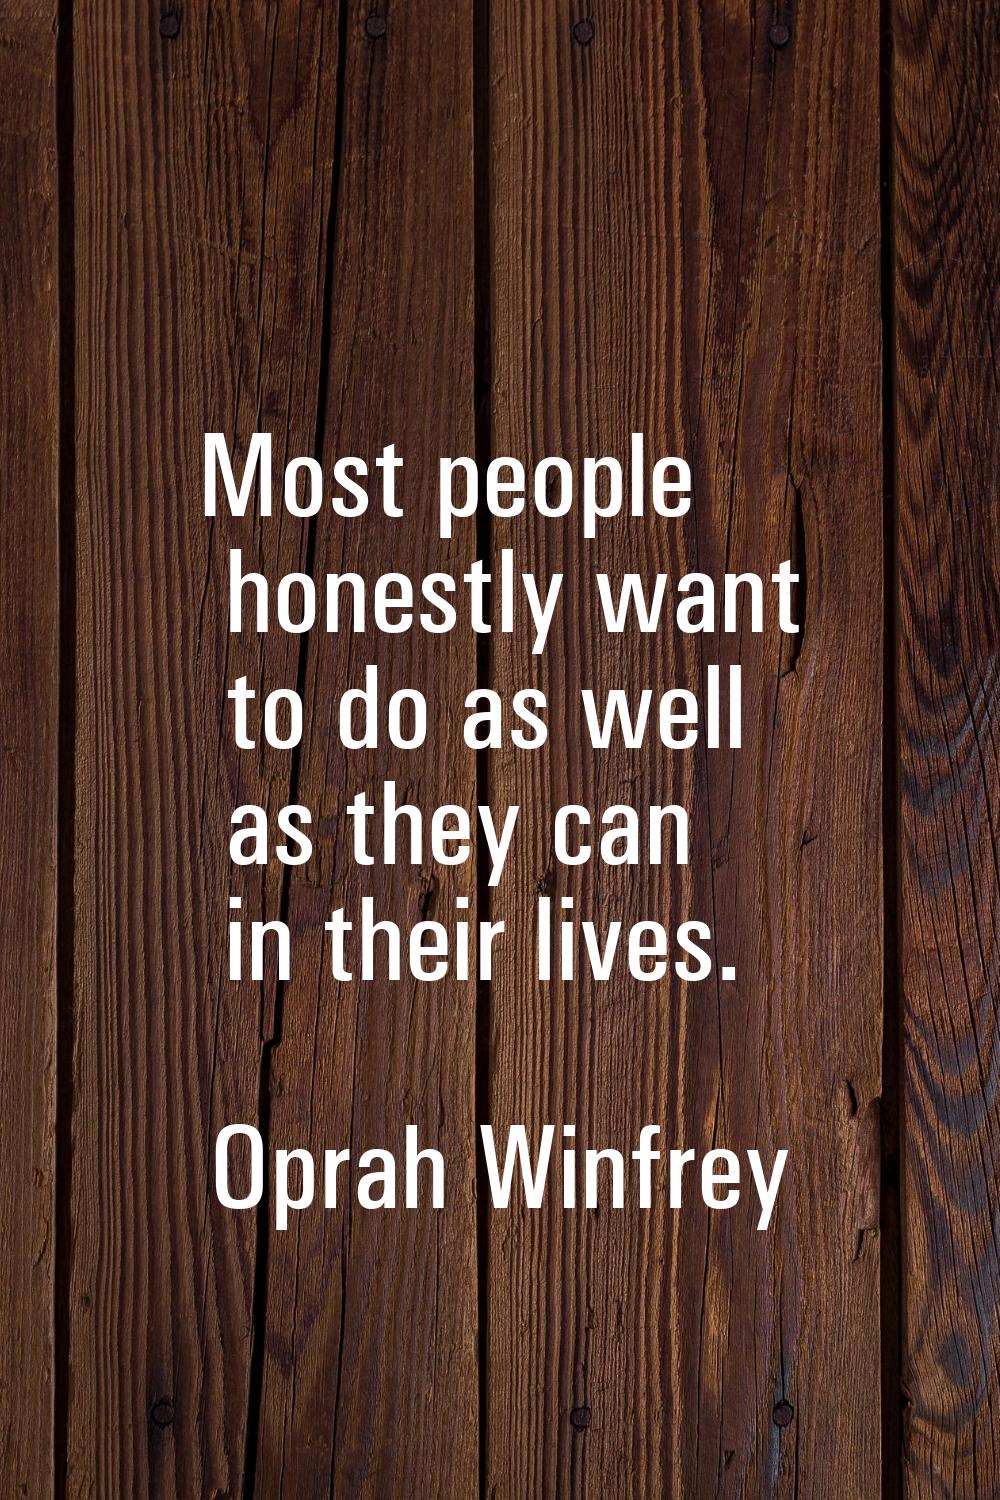 Most people honestly want to do as well as they can in their lives.